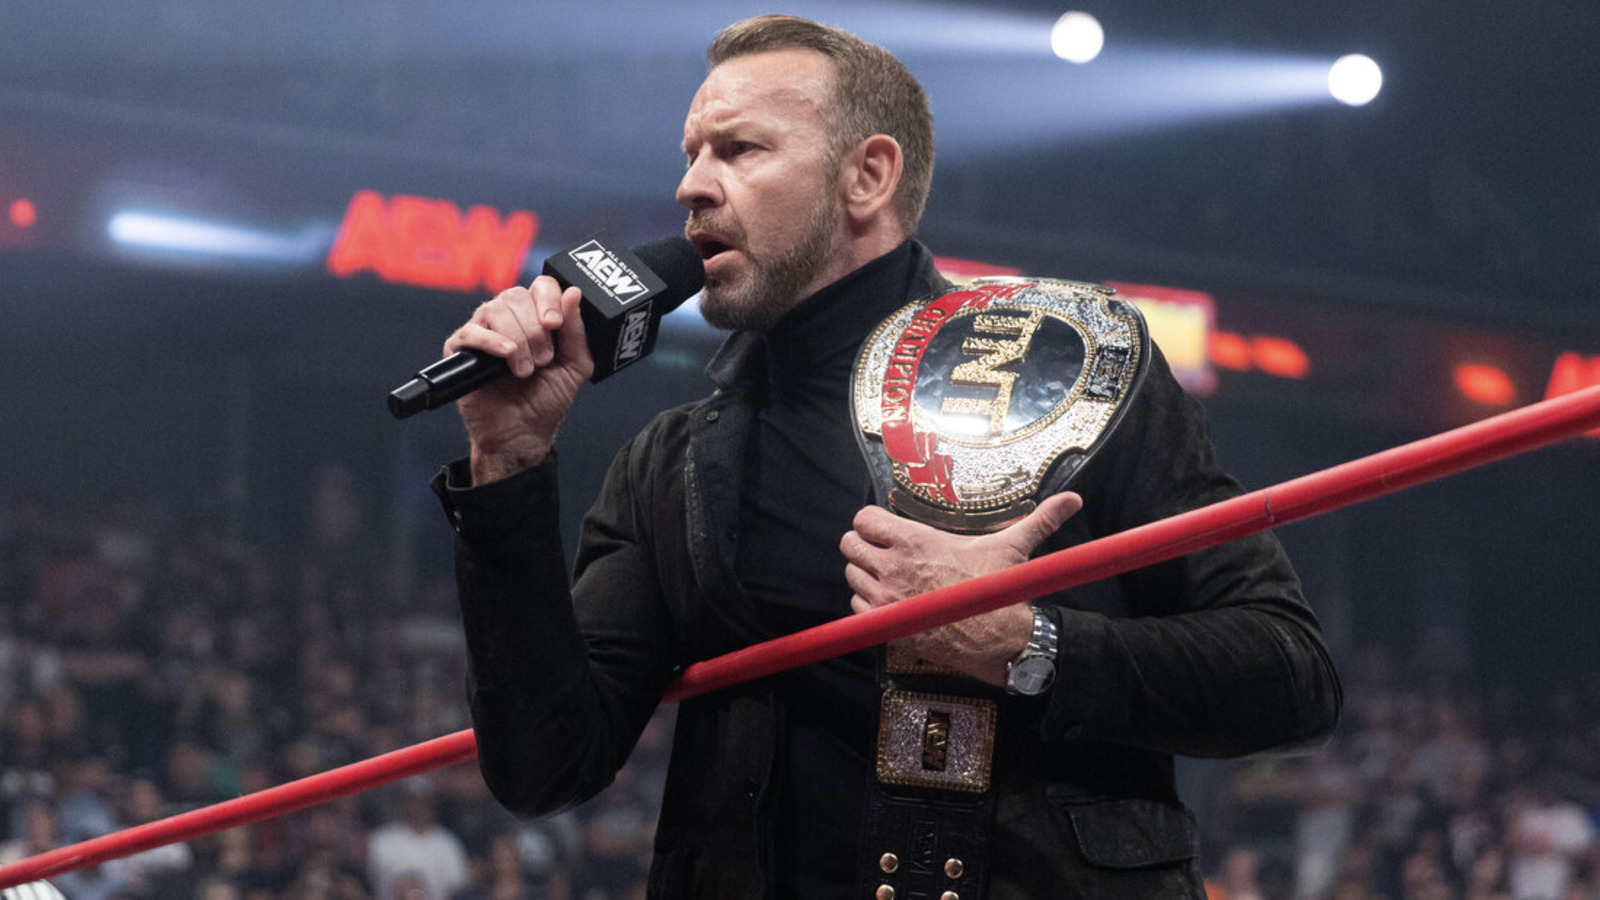 Christian Cage Replaces AR Fox In Tag Team Coffin Match At AEW All In